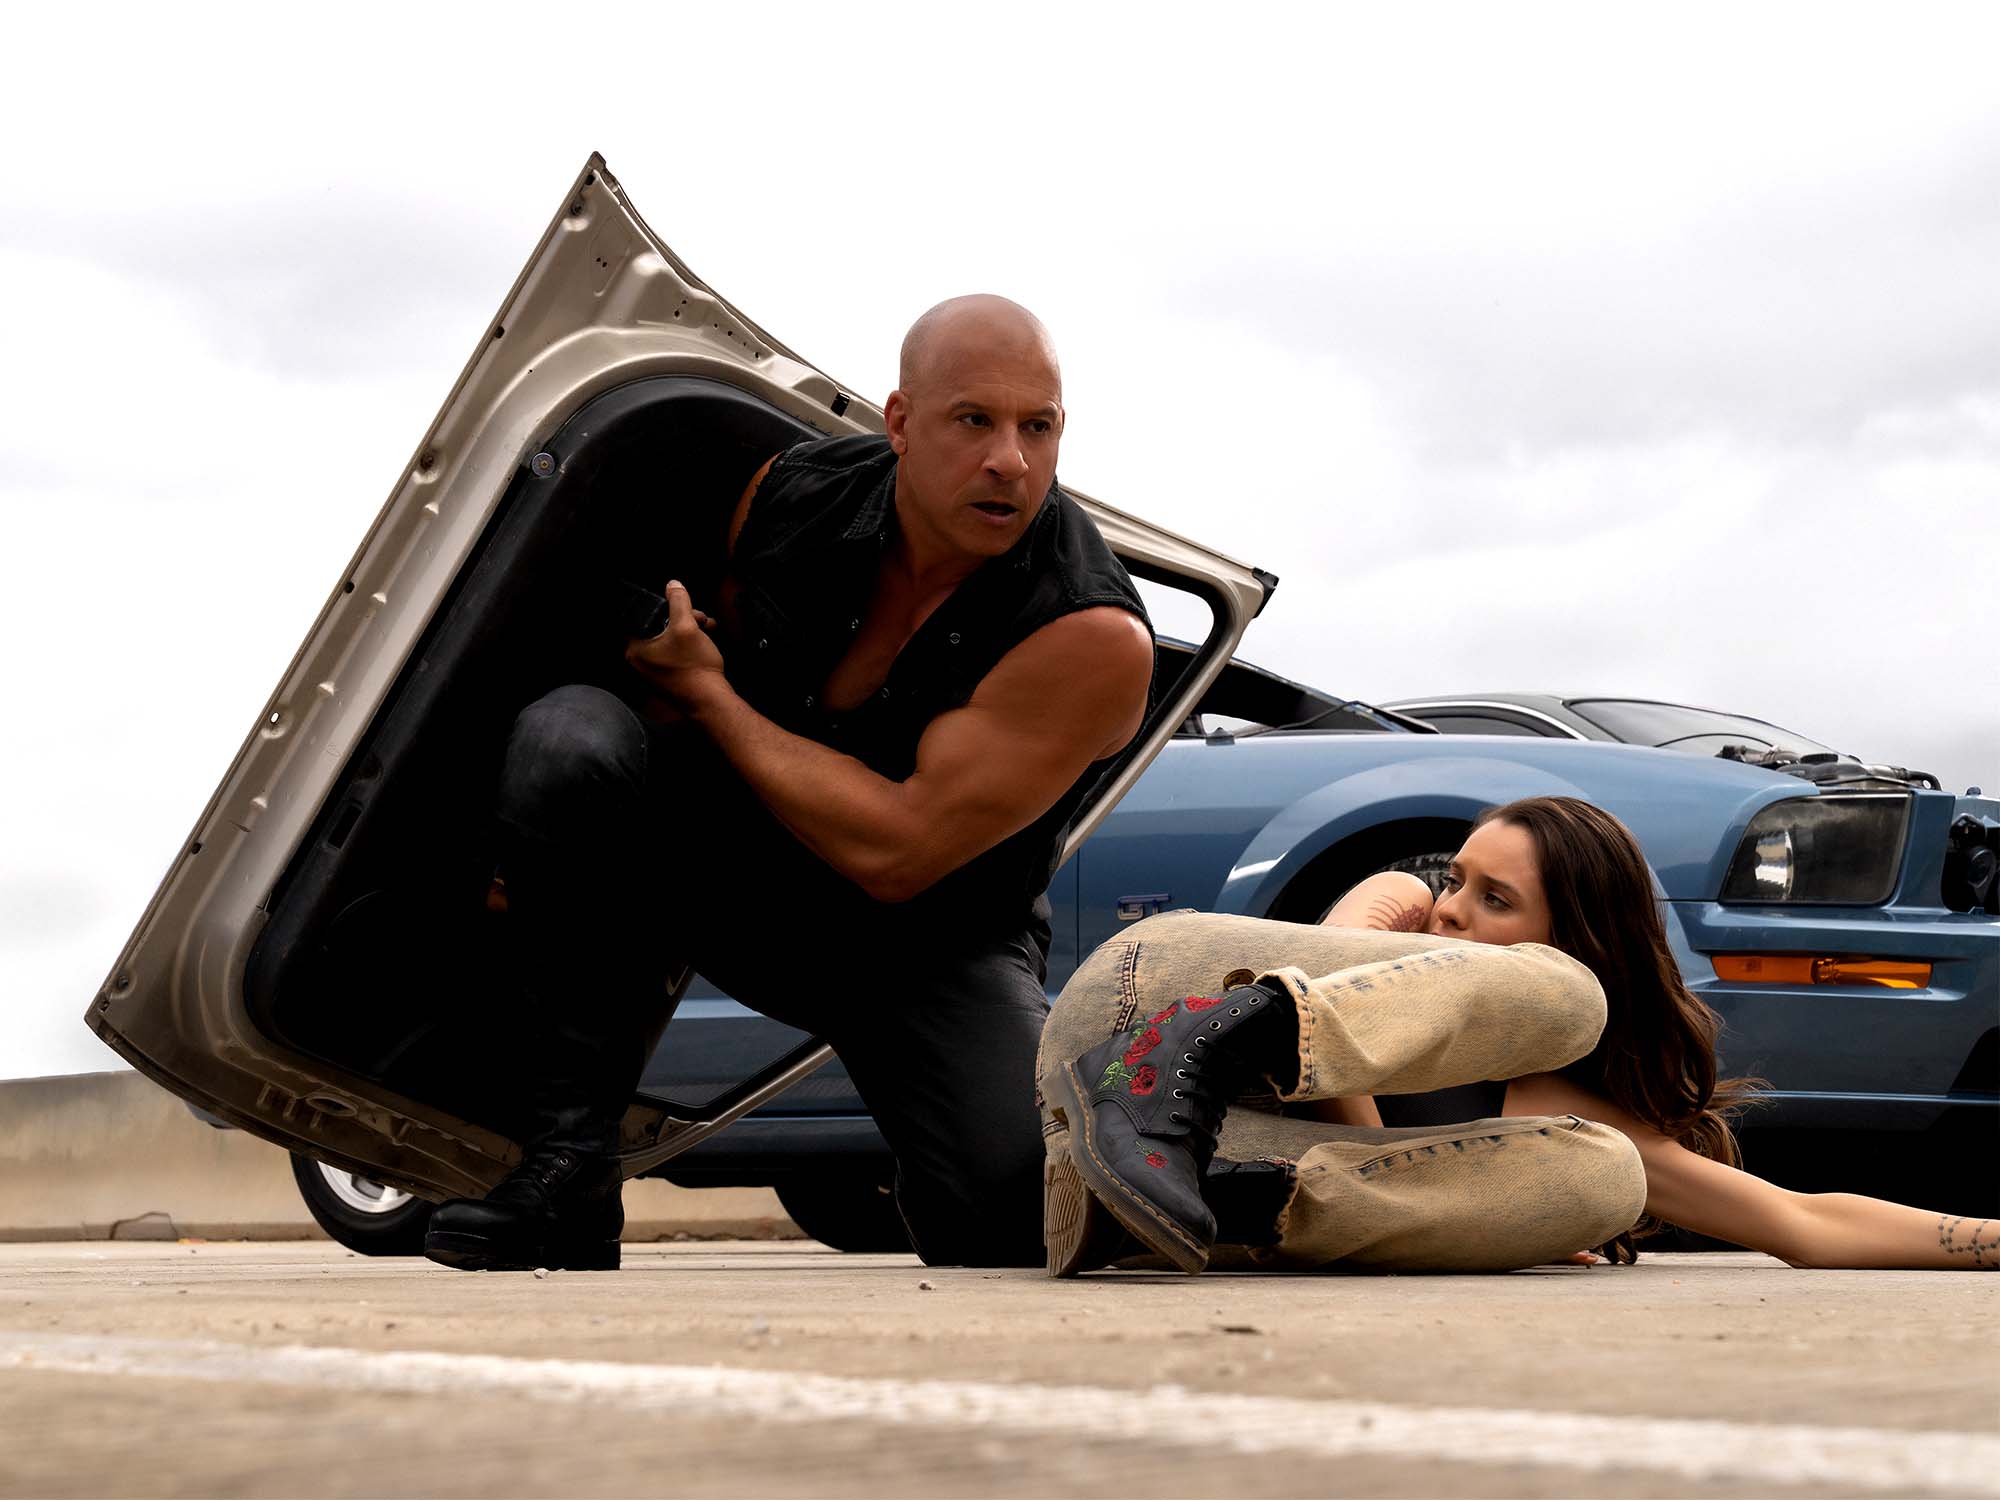 Fast X review – The most ridiculous Fast and Furious